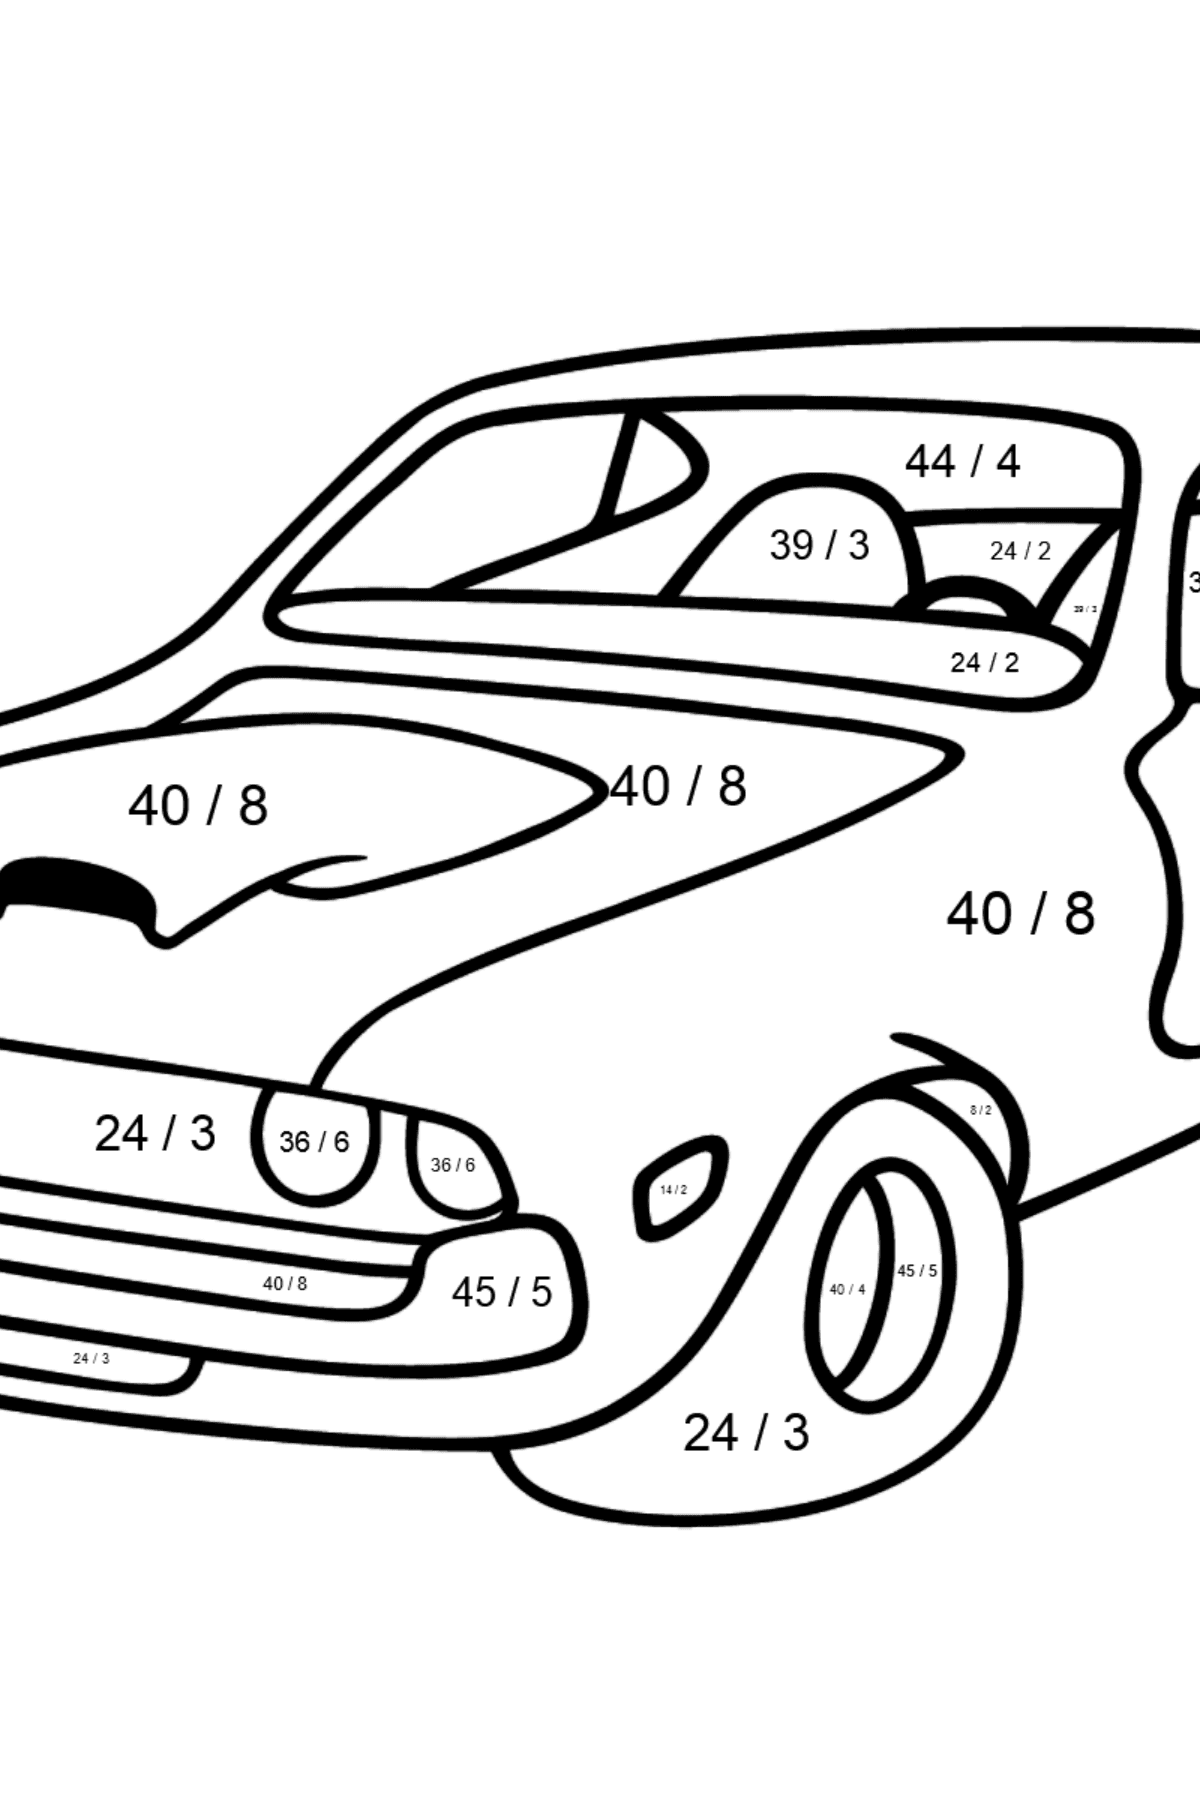 Chevrolet-Chevy Sports Car coloring page - Math Coloring - Division for Kids